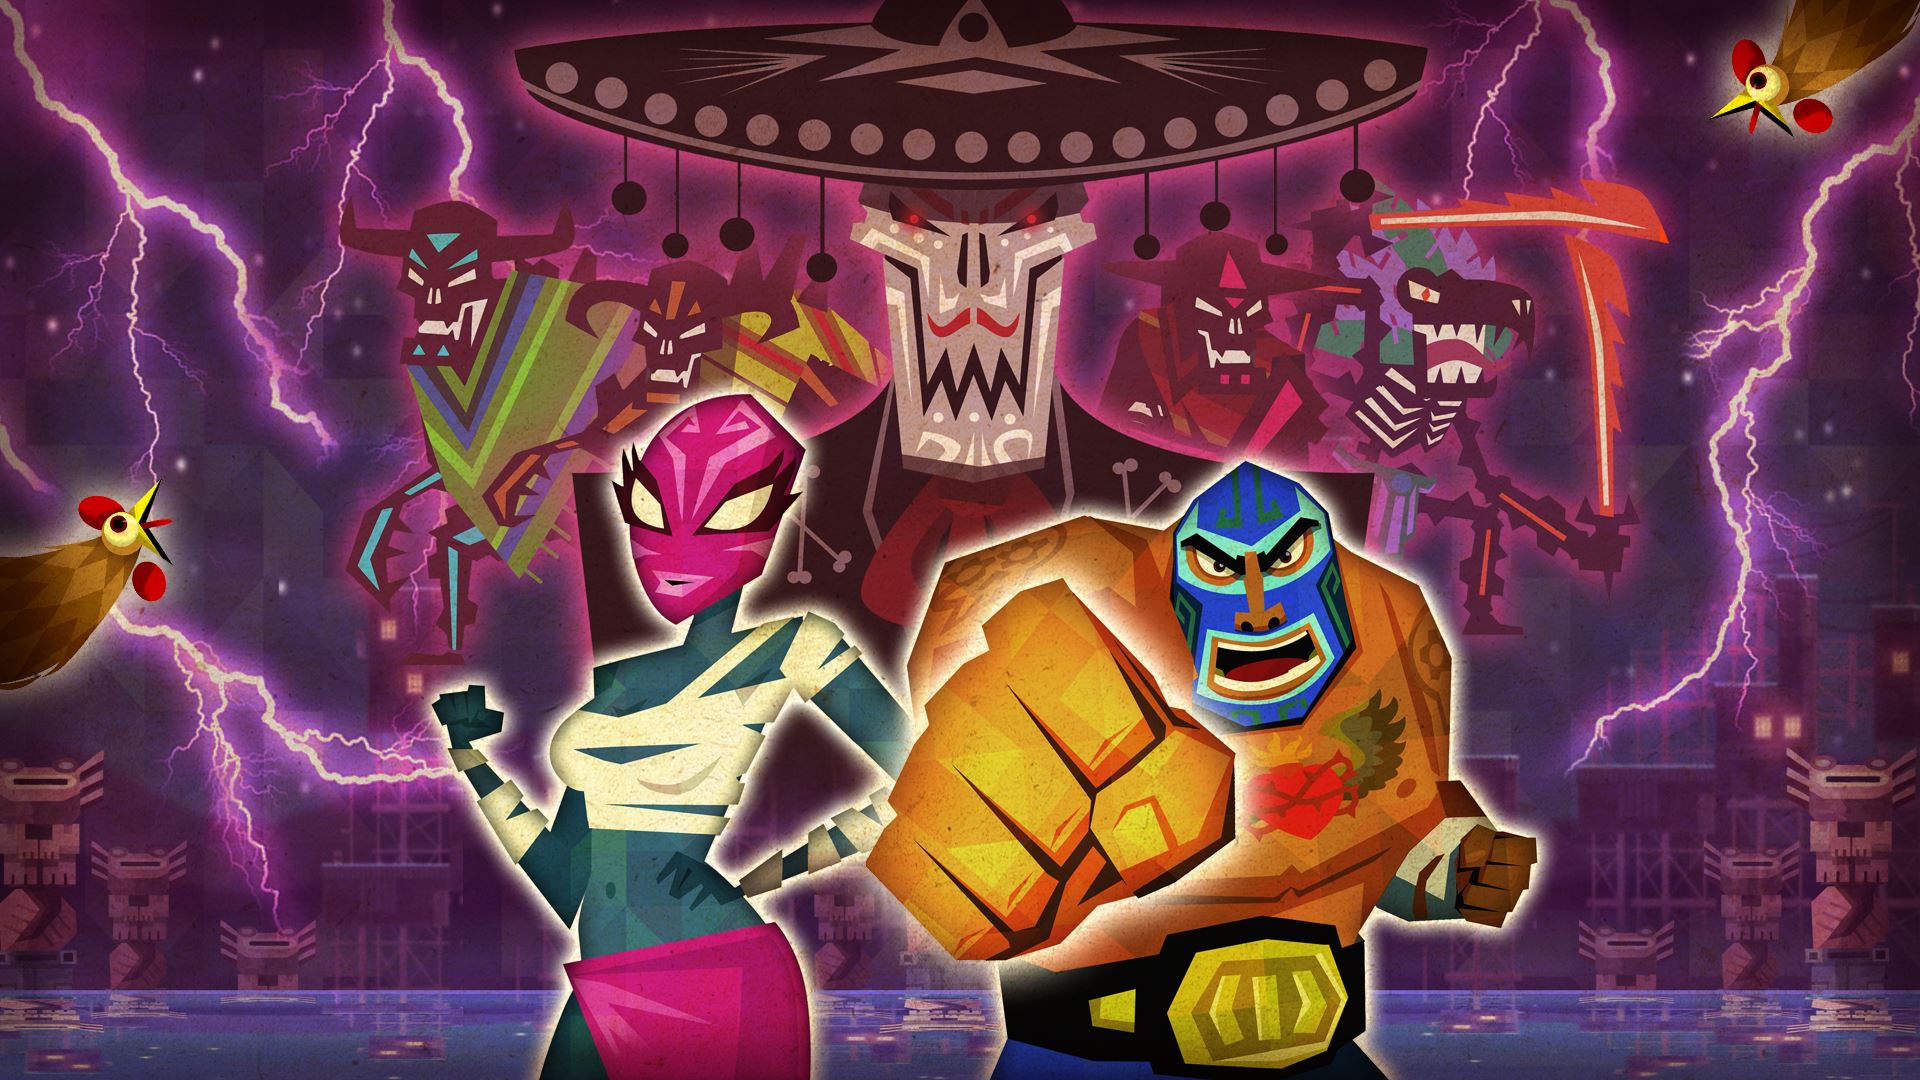 Guacamelee! version for PC